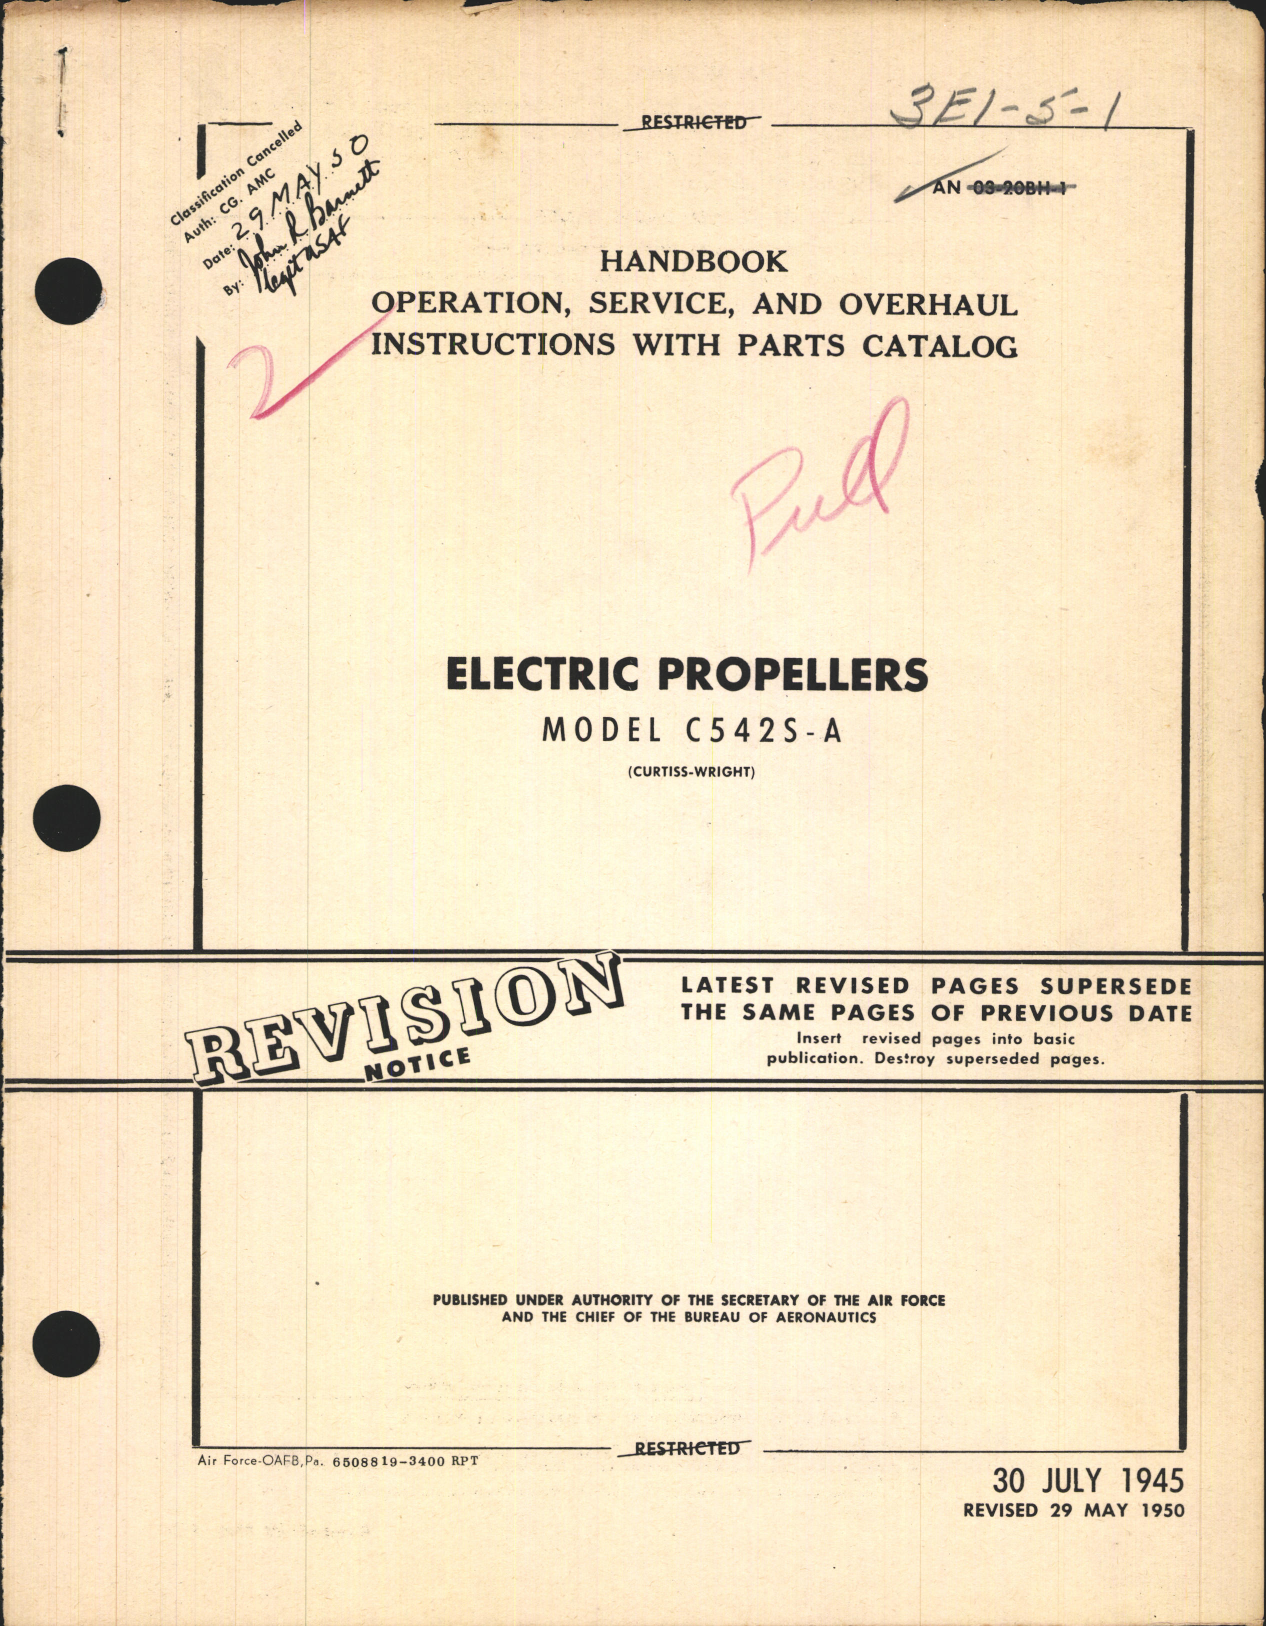 Sample page 1 from AirCorps Library document: Operation, Service, & Overhaul Instructions with Parts Catalog for Electric Propellers Model C542S-A